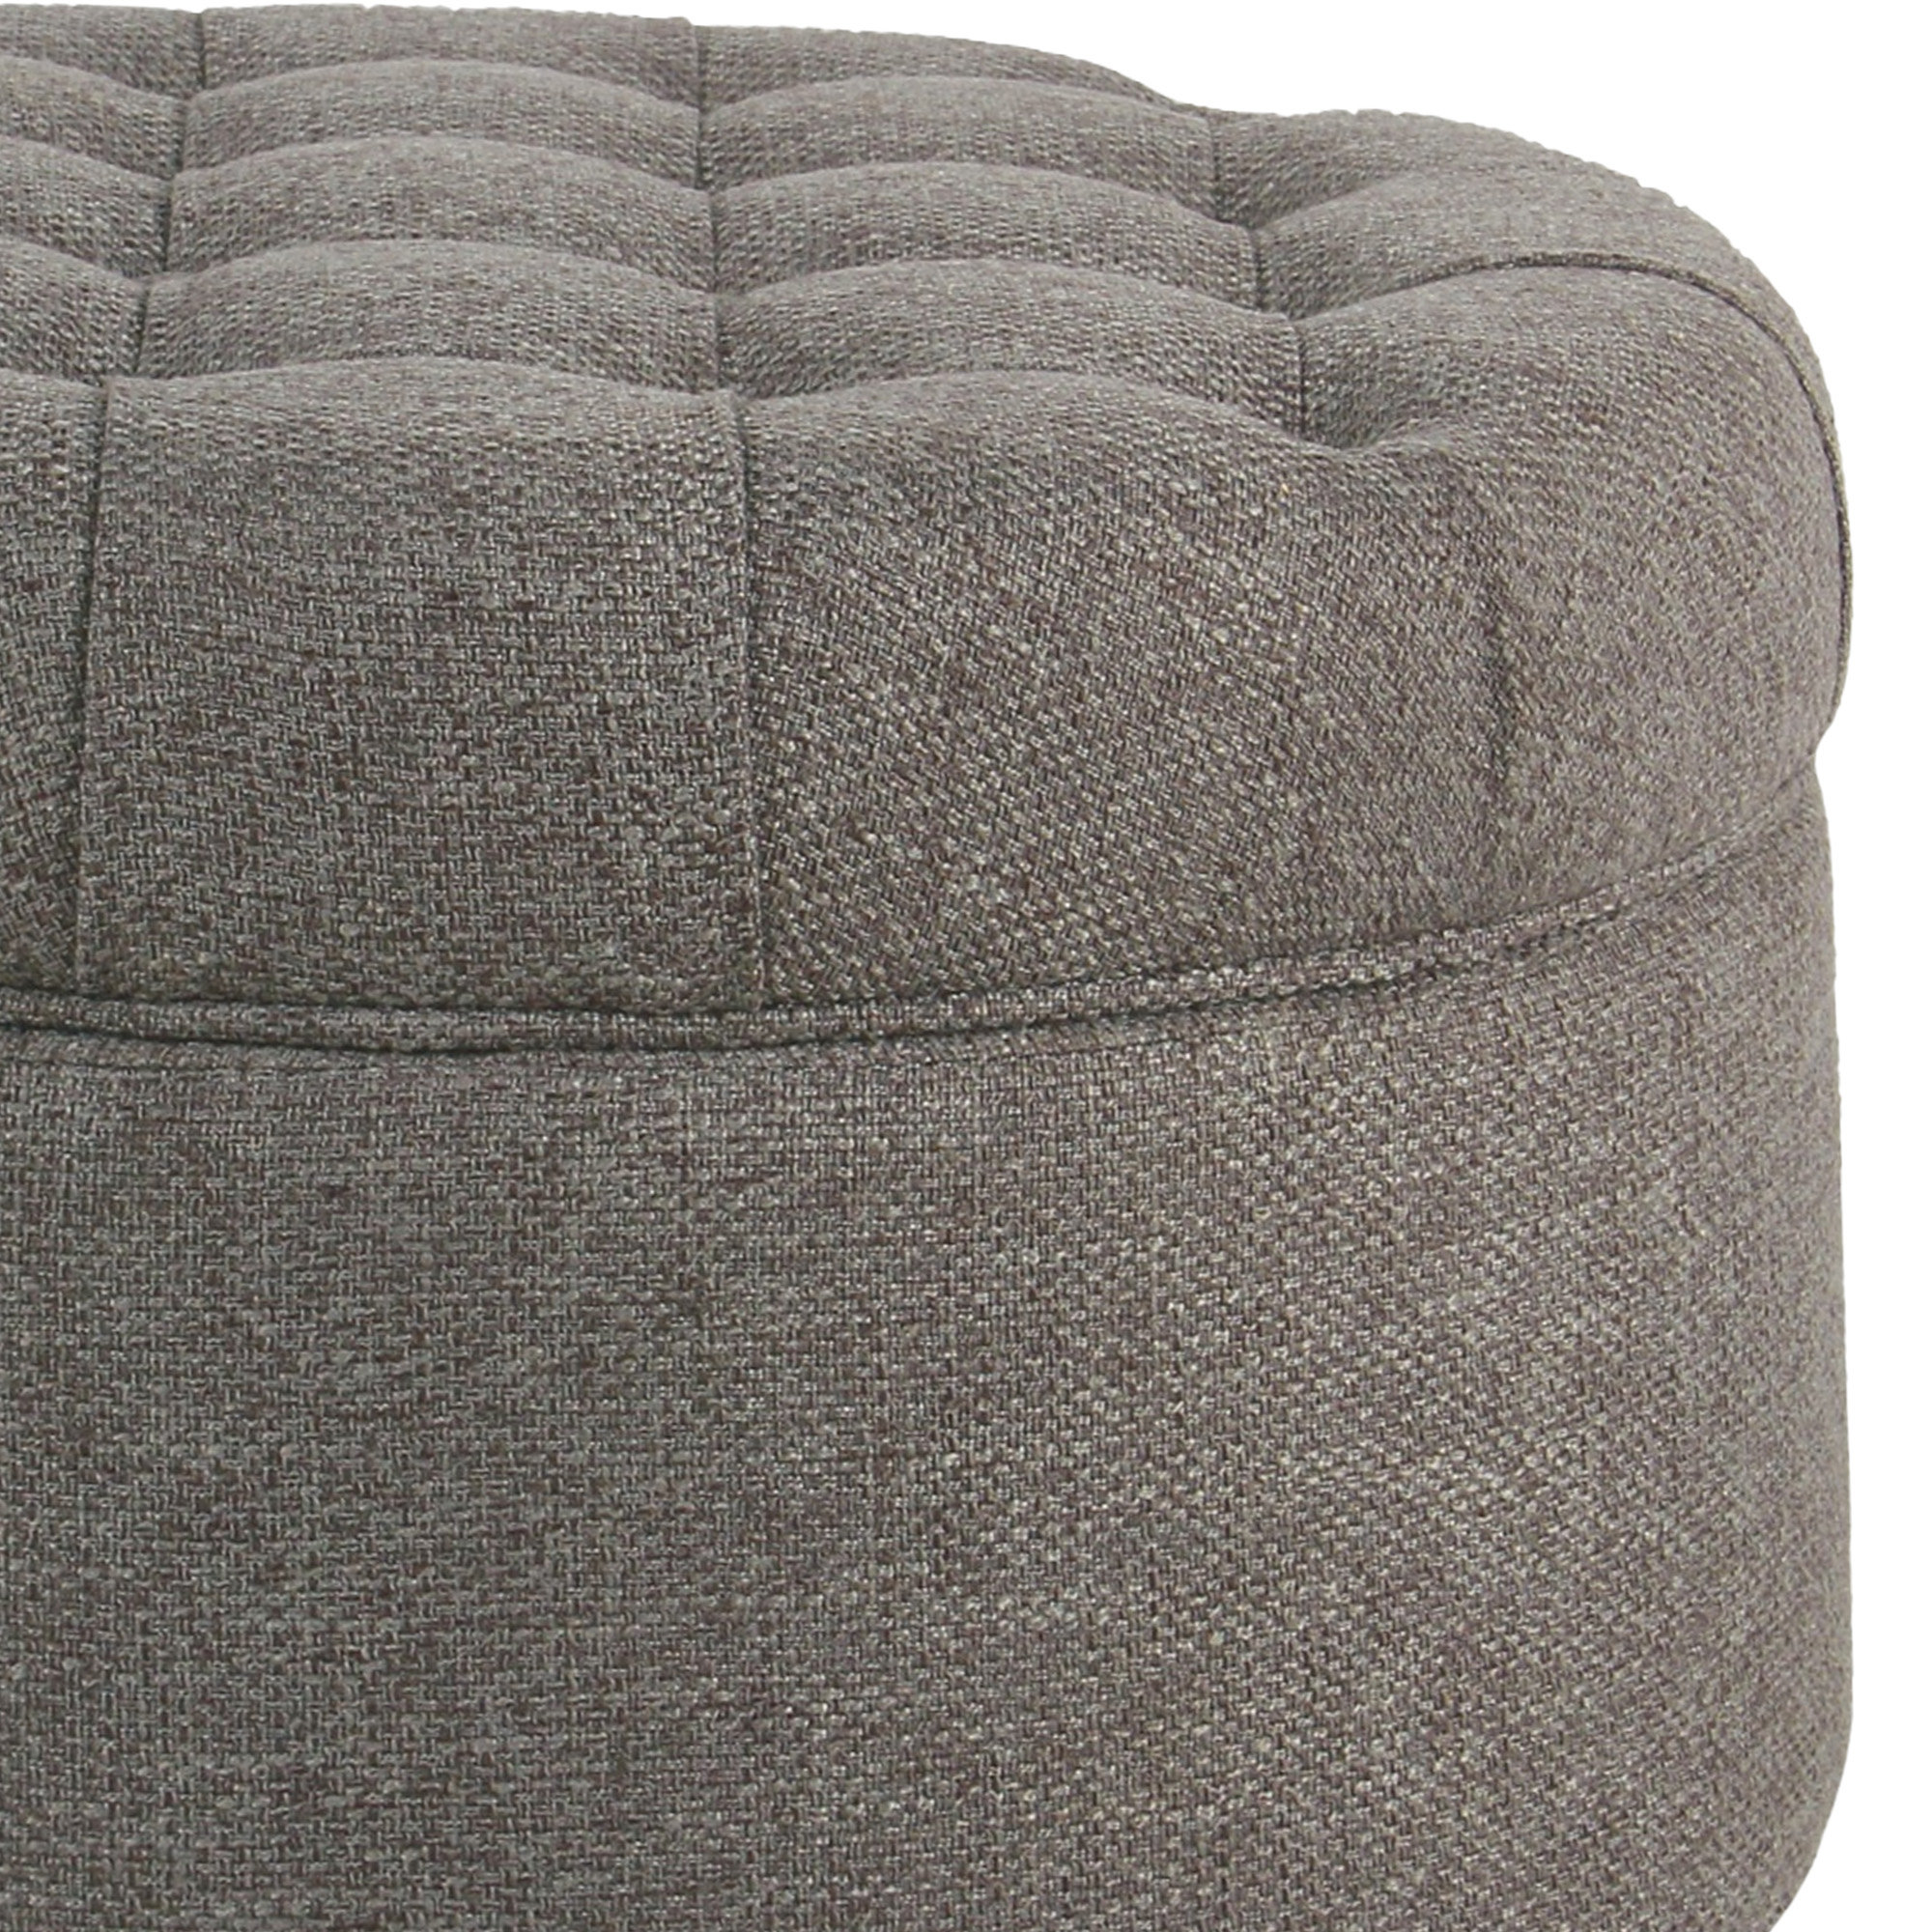 Fabric Upholstered Wooden Ottoman With Tufted Lift Off Lid Storage, Dark Gray- Saltoro Sherpi